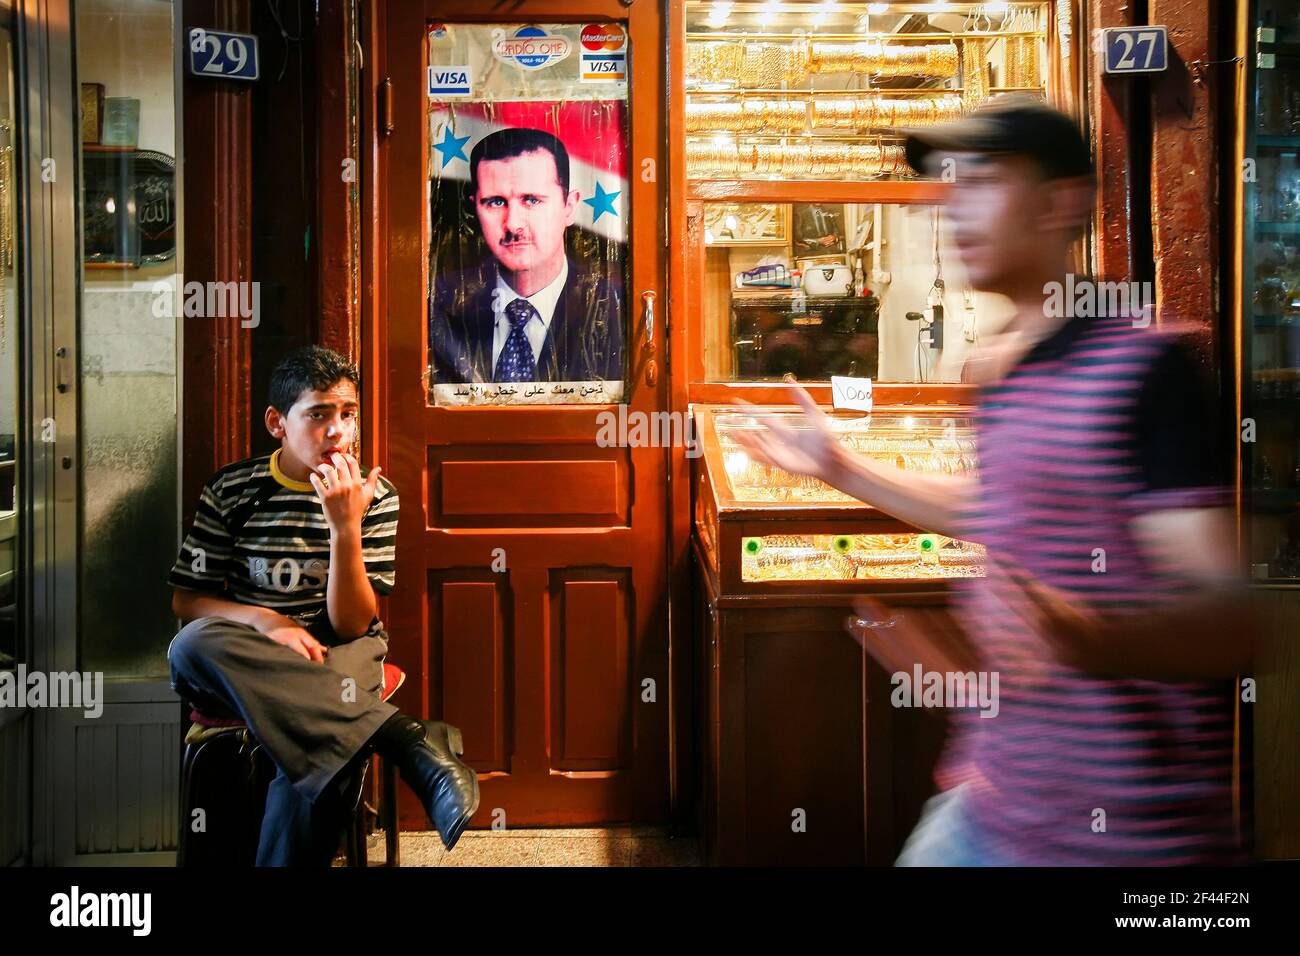 Damascus,Syria - August 04,2010 : A poster of Syrian president Bashar al-Assad hangs in front of a shop in the old city of Damascus Stock Photo